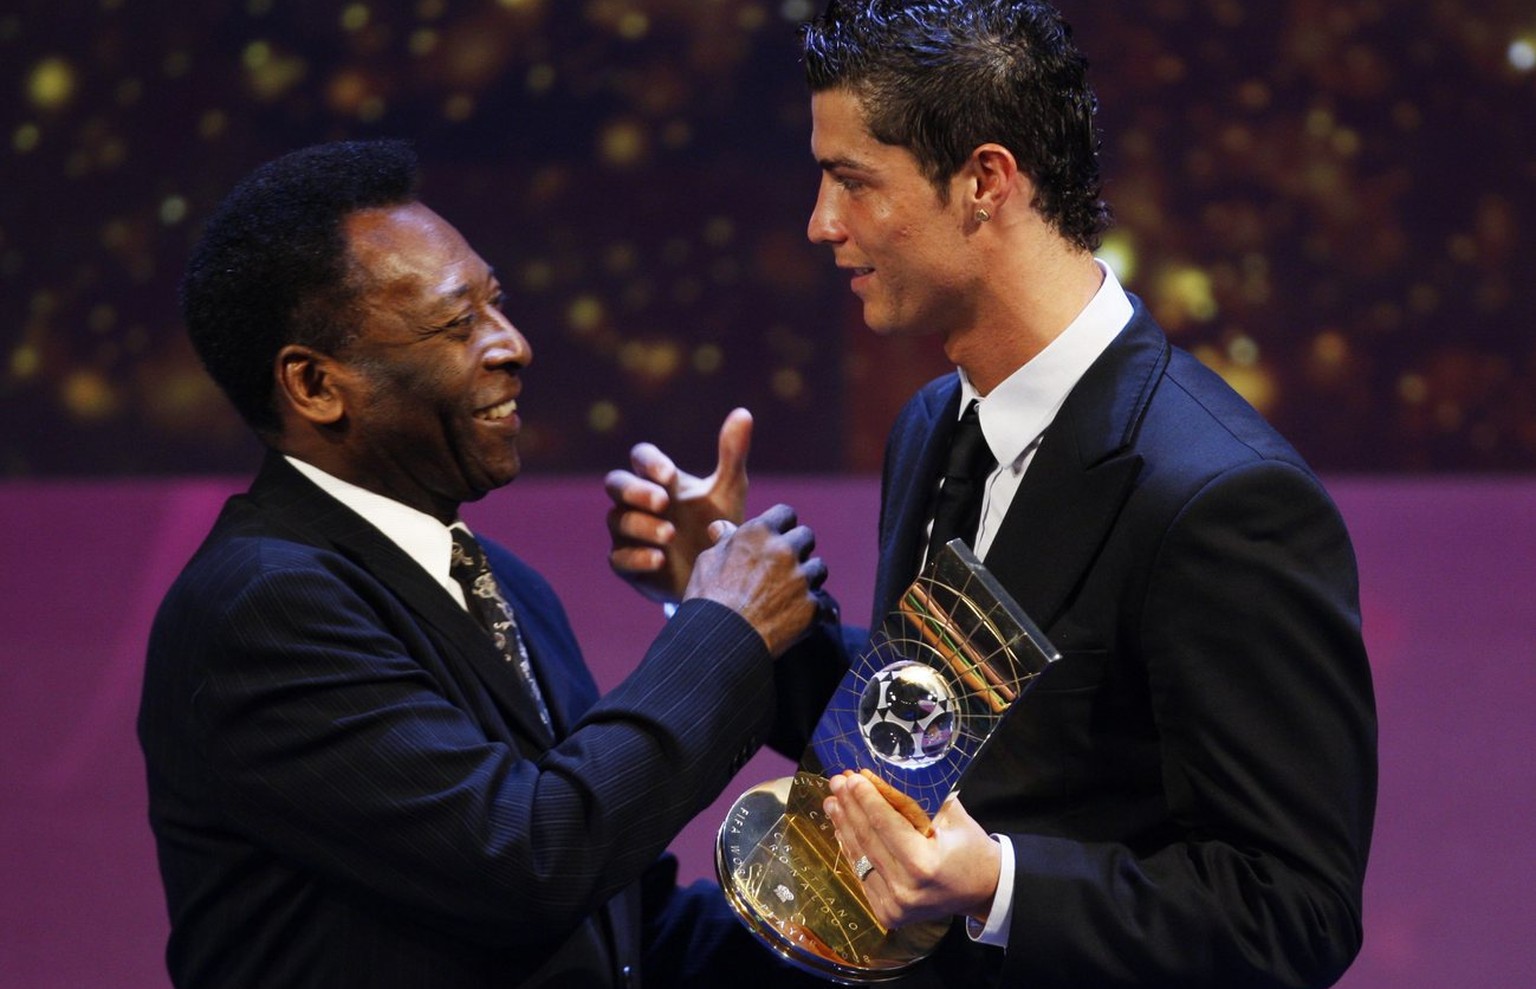 Soccer player Cristiano Ronaldo from Portugal, right, receives the trophy from former Brazilian soccer star Pele, left, after being named FIFA World Player of the Year during the FIFA World Player Gal ...